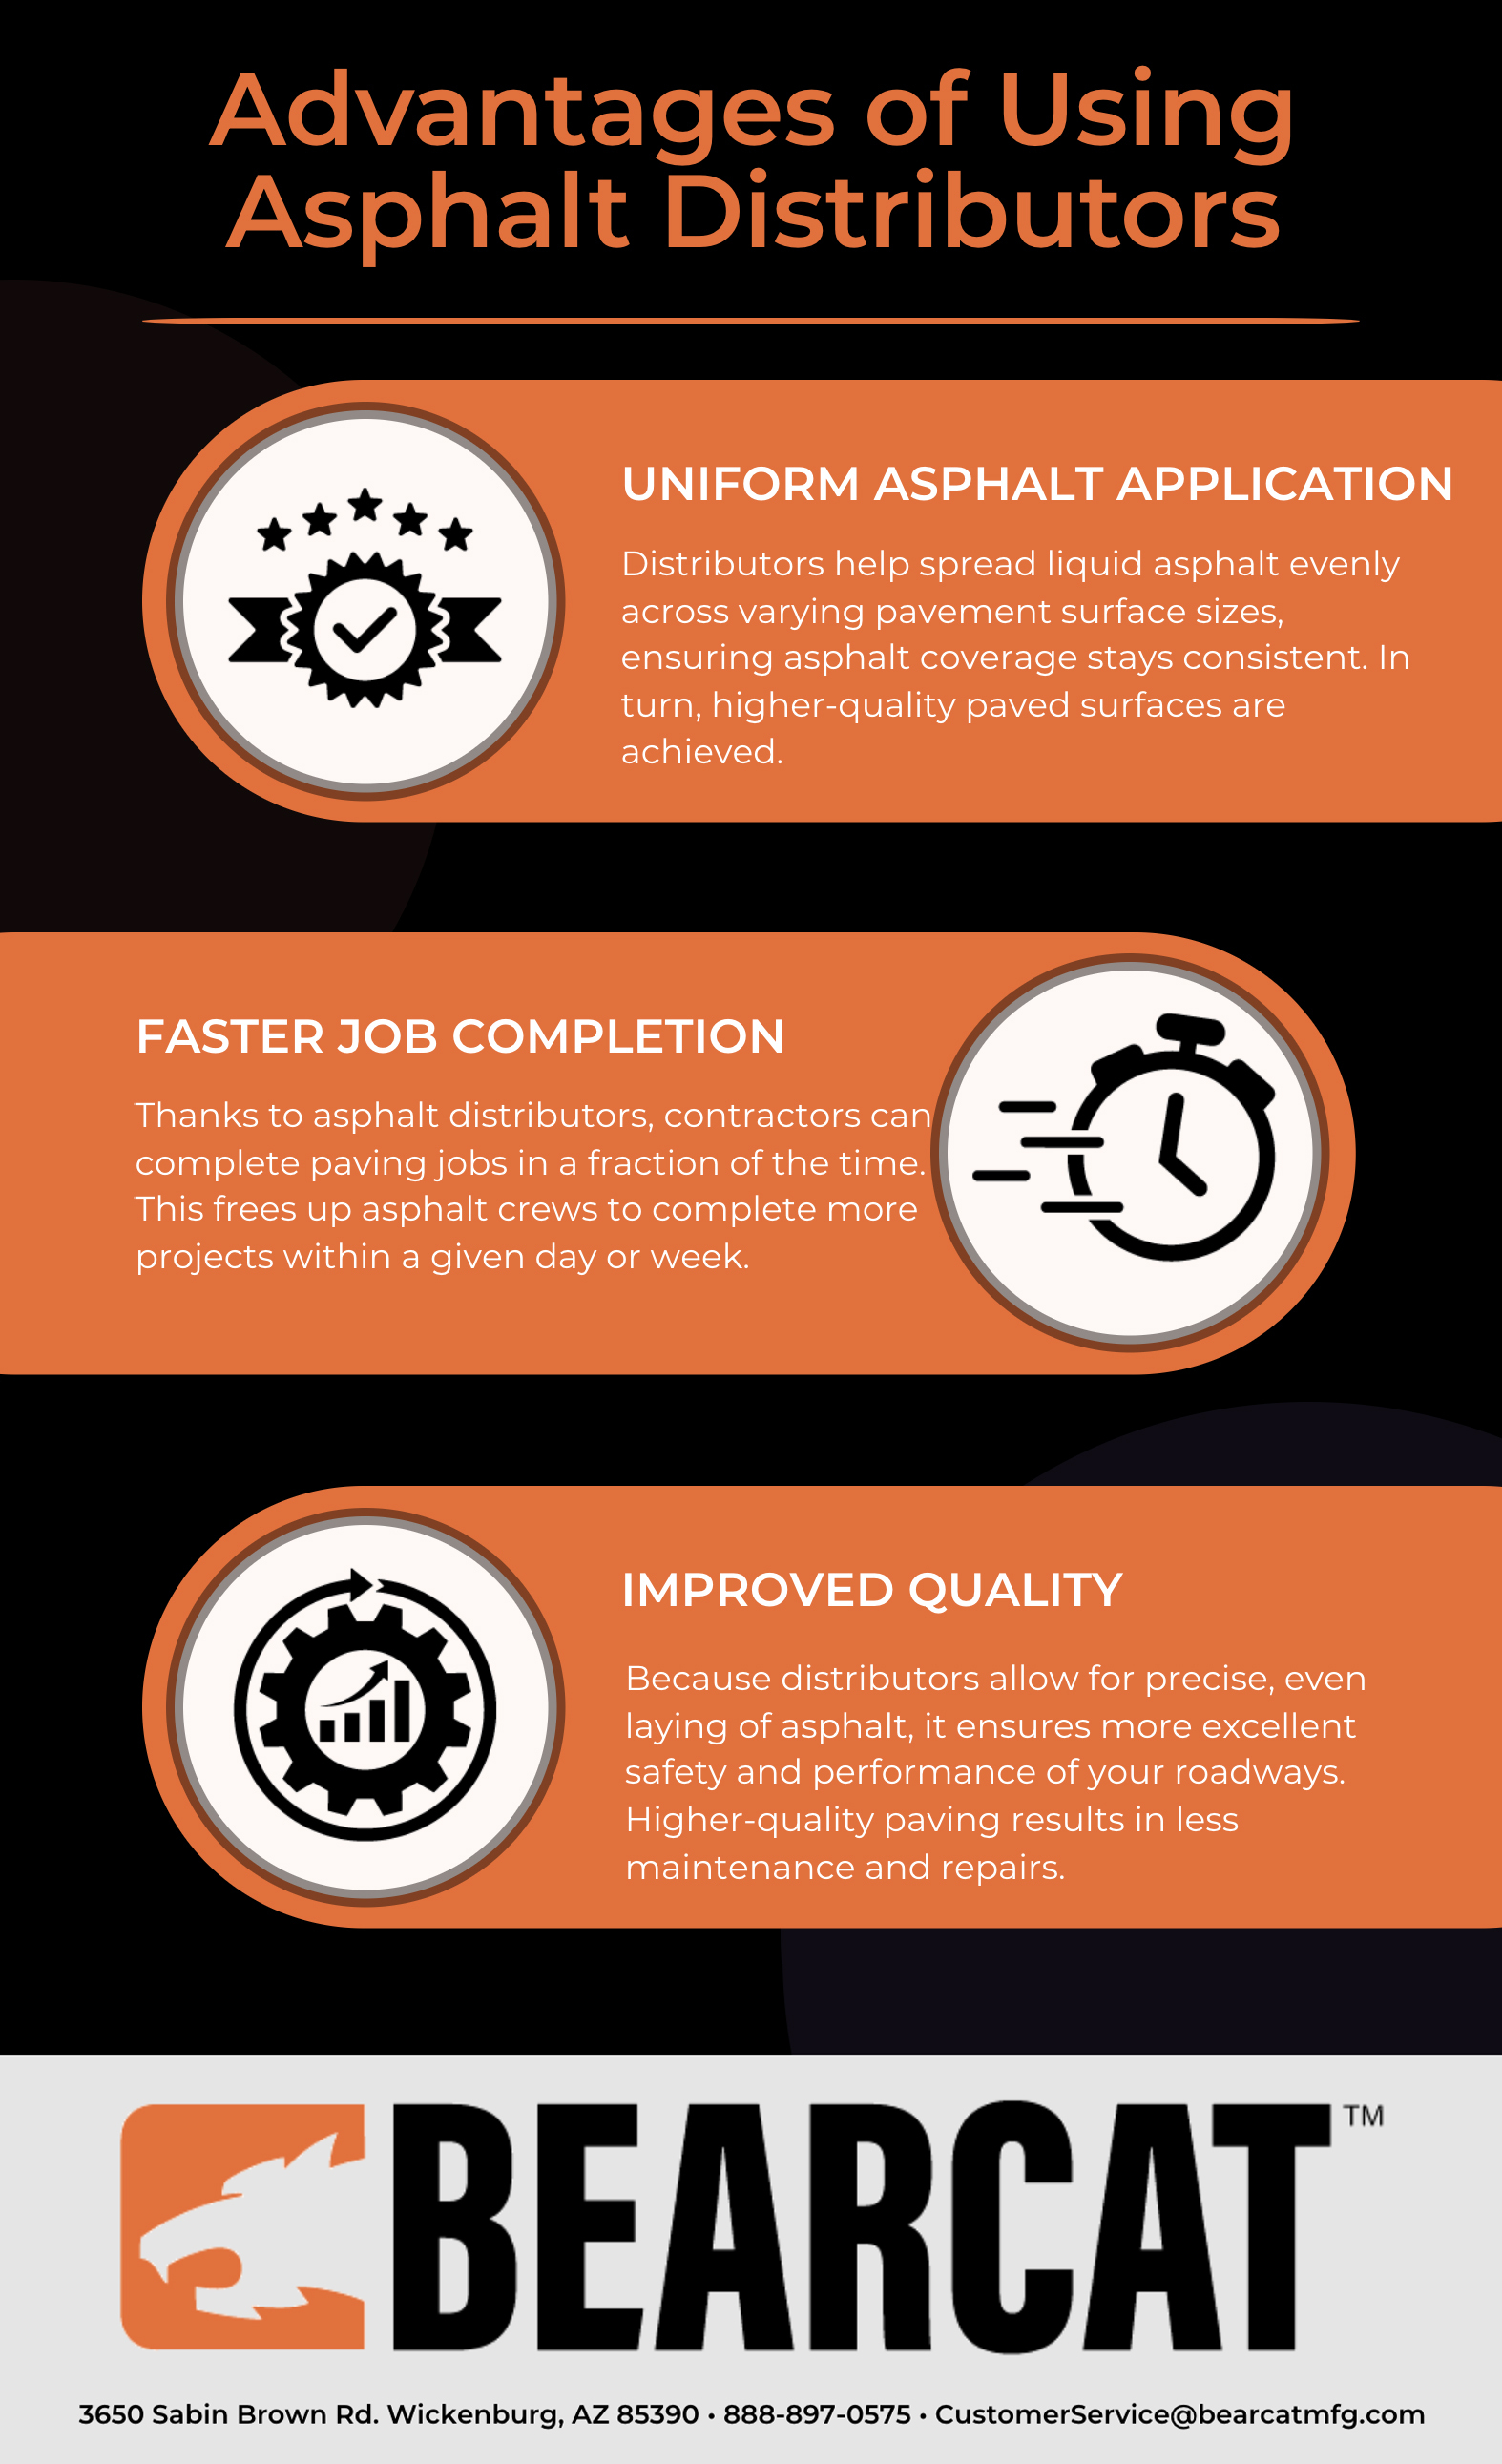 An infographic discussing the advantages of using asphalt distributors manufactured by BearCat MFG. Such benefits of relying on BearCat's distributors include uniform asphalt application, faster job completion, and improved quality of pavement